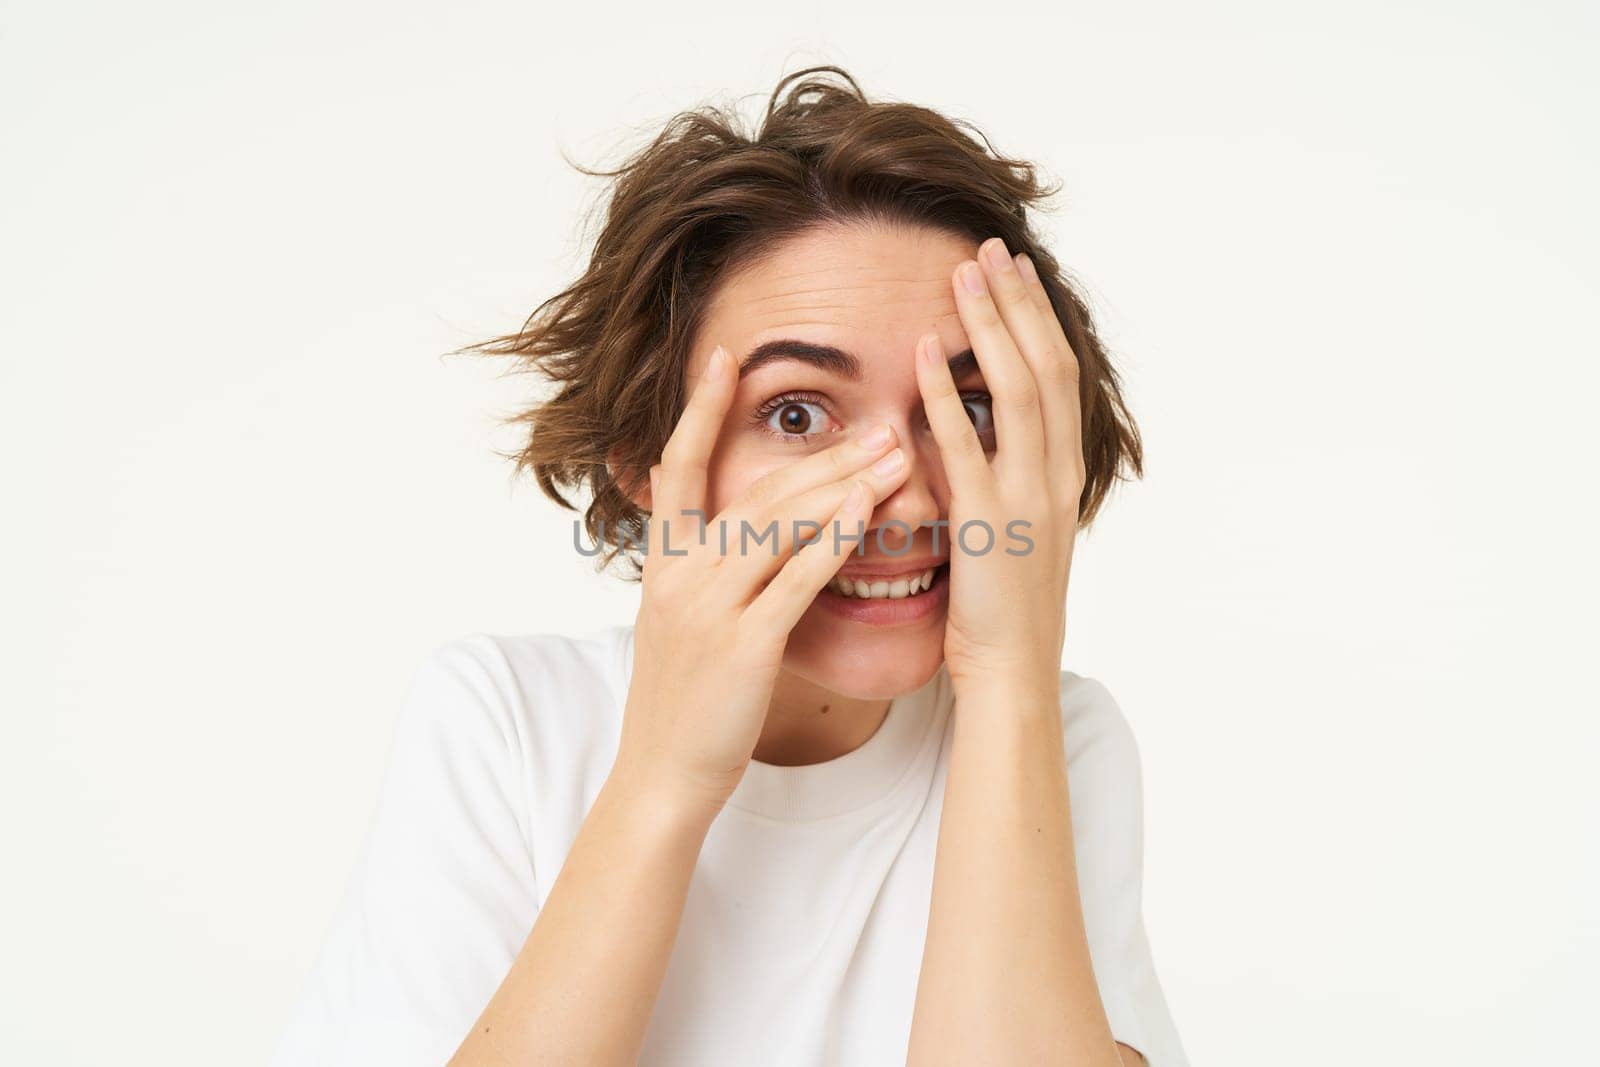 Image of funny woman peeking through fingers, looking at something with curious face expression, waiting for surprise and smiling excited, isolated over white background.